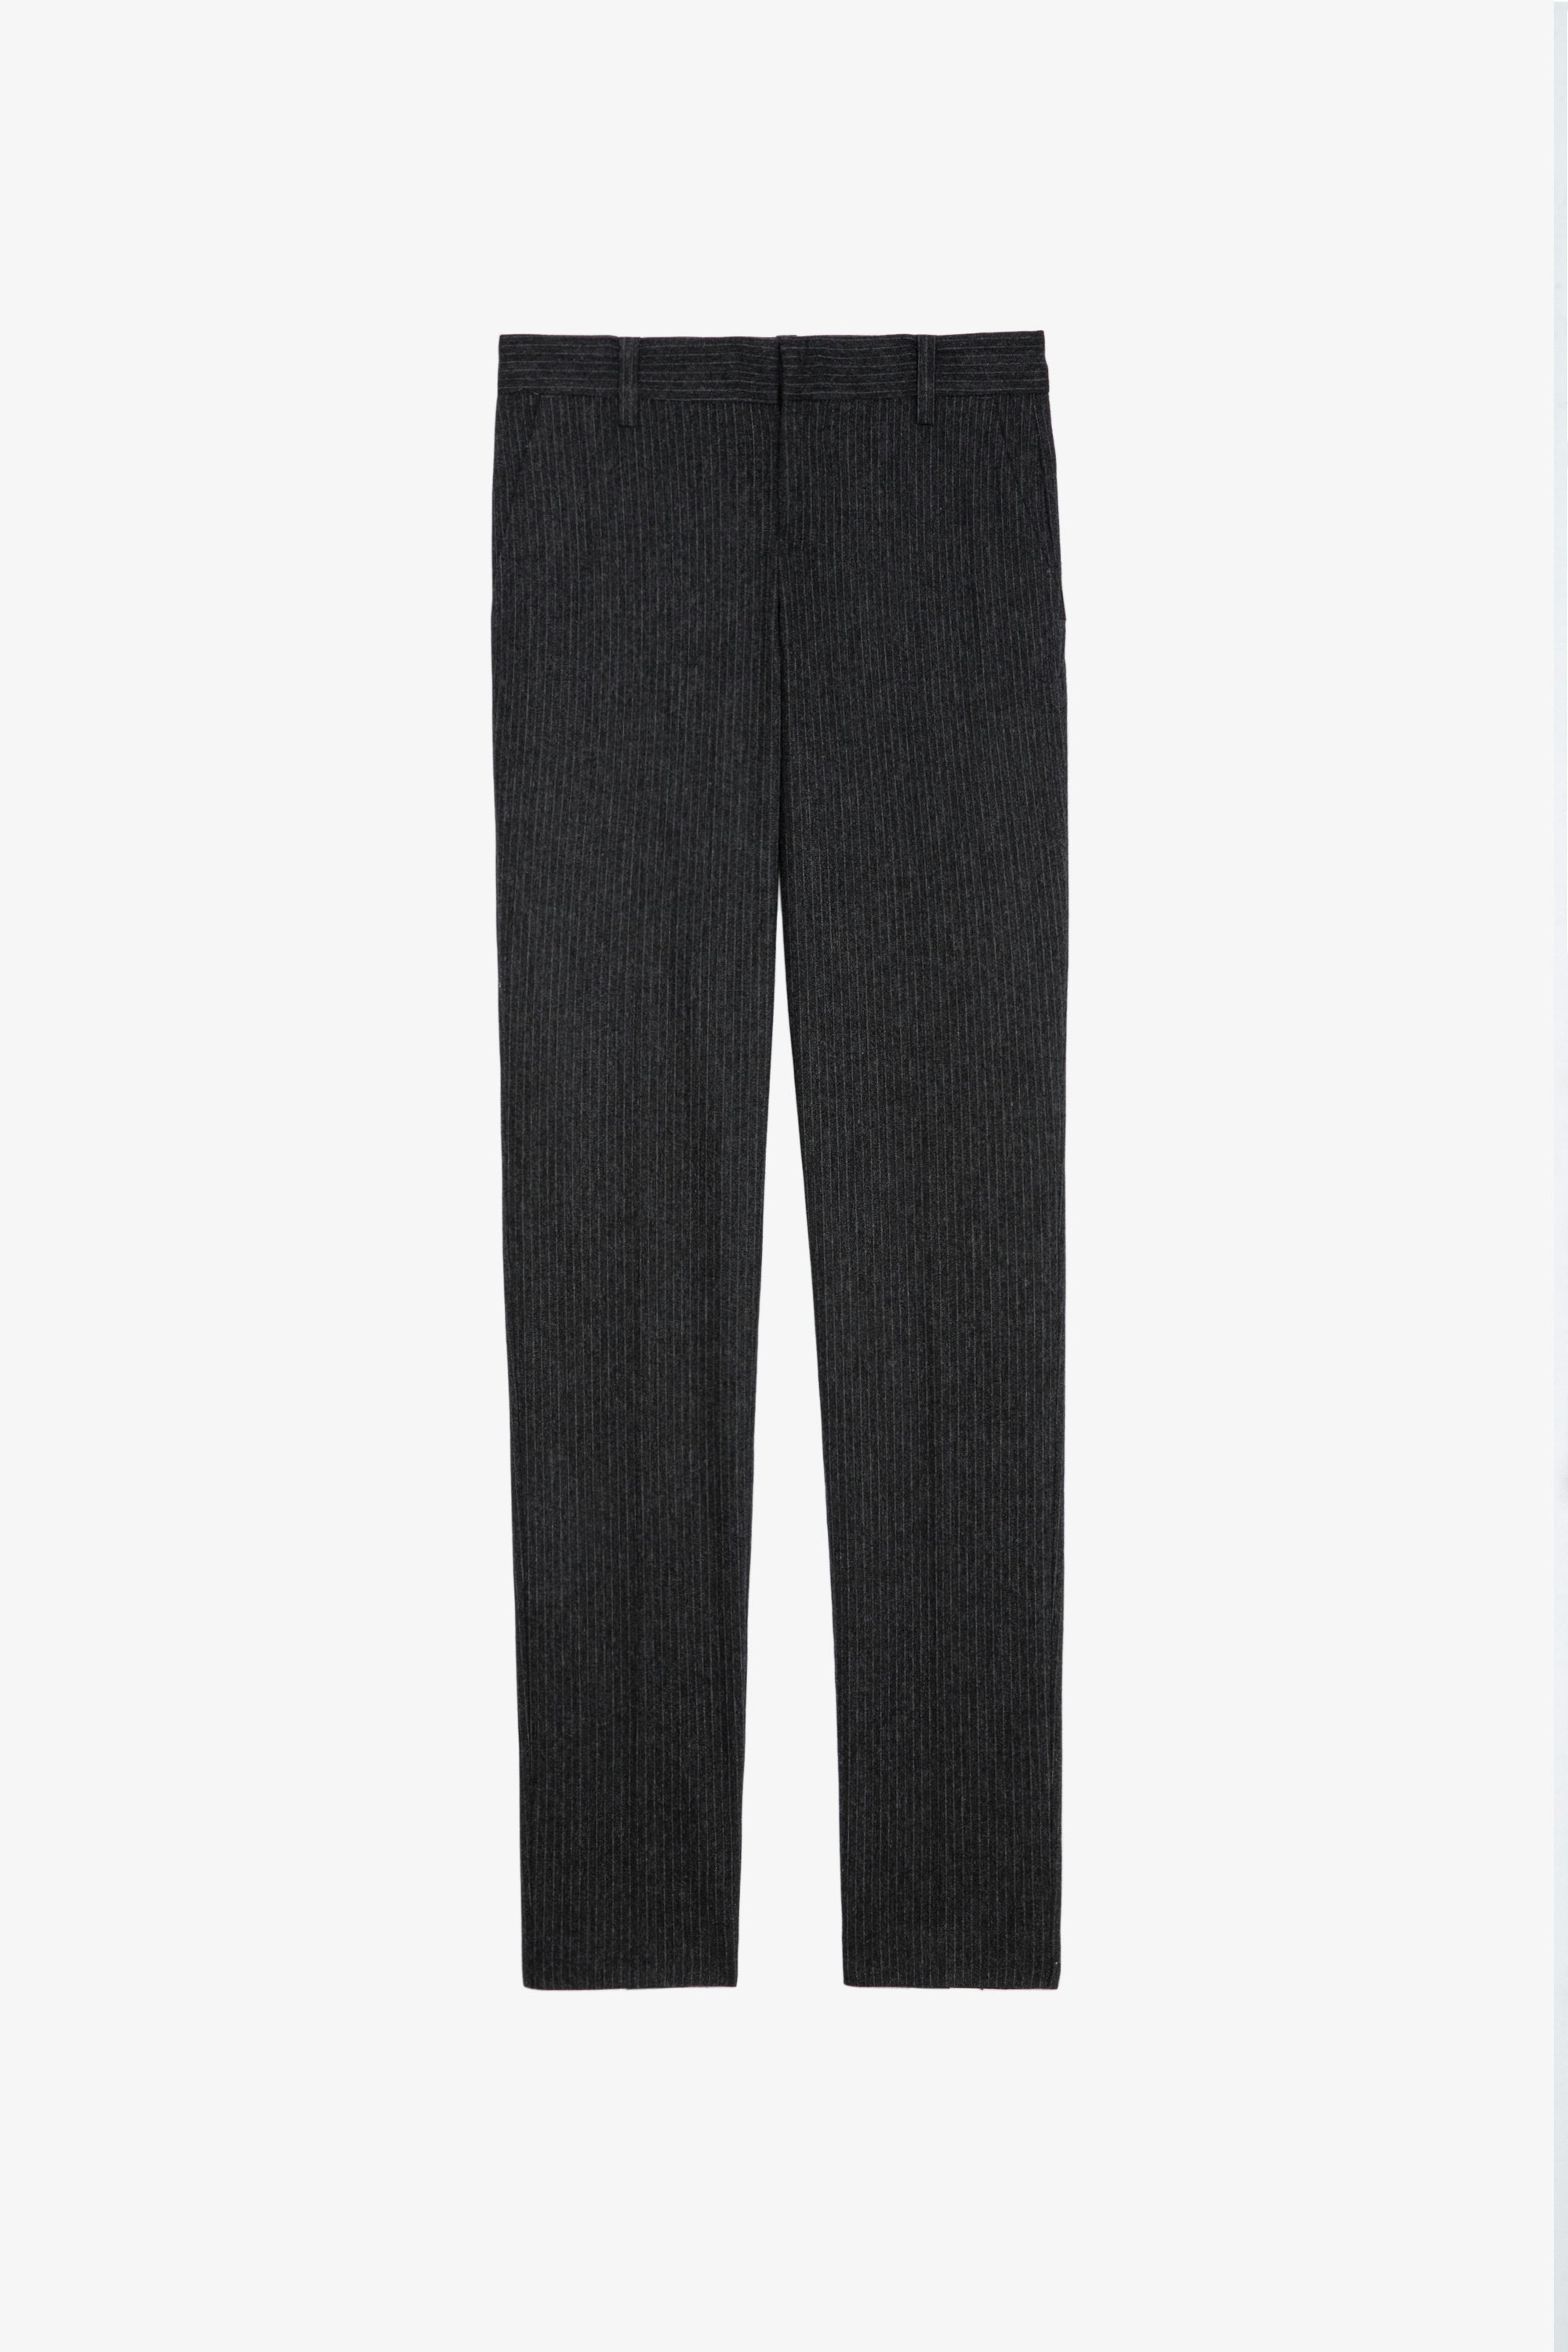 Prune パンツ Women’s charcoal striped suit trousers